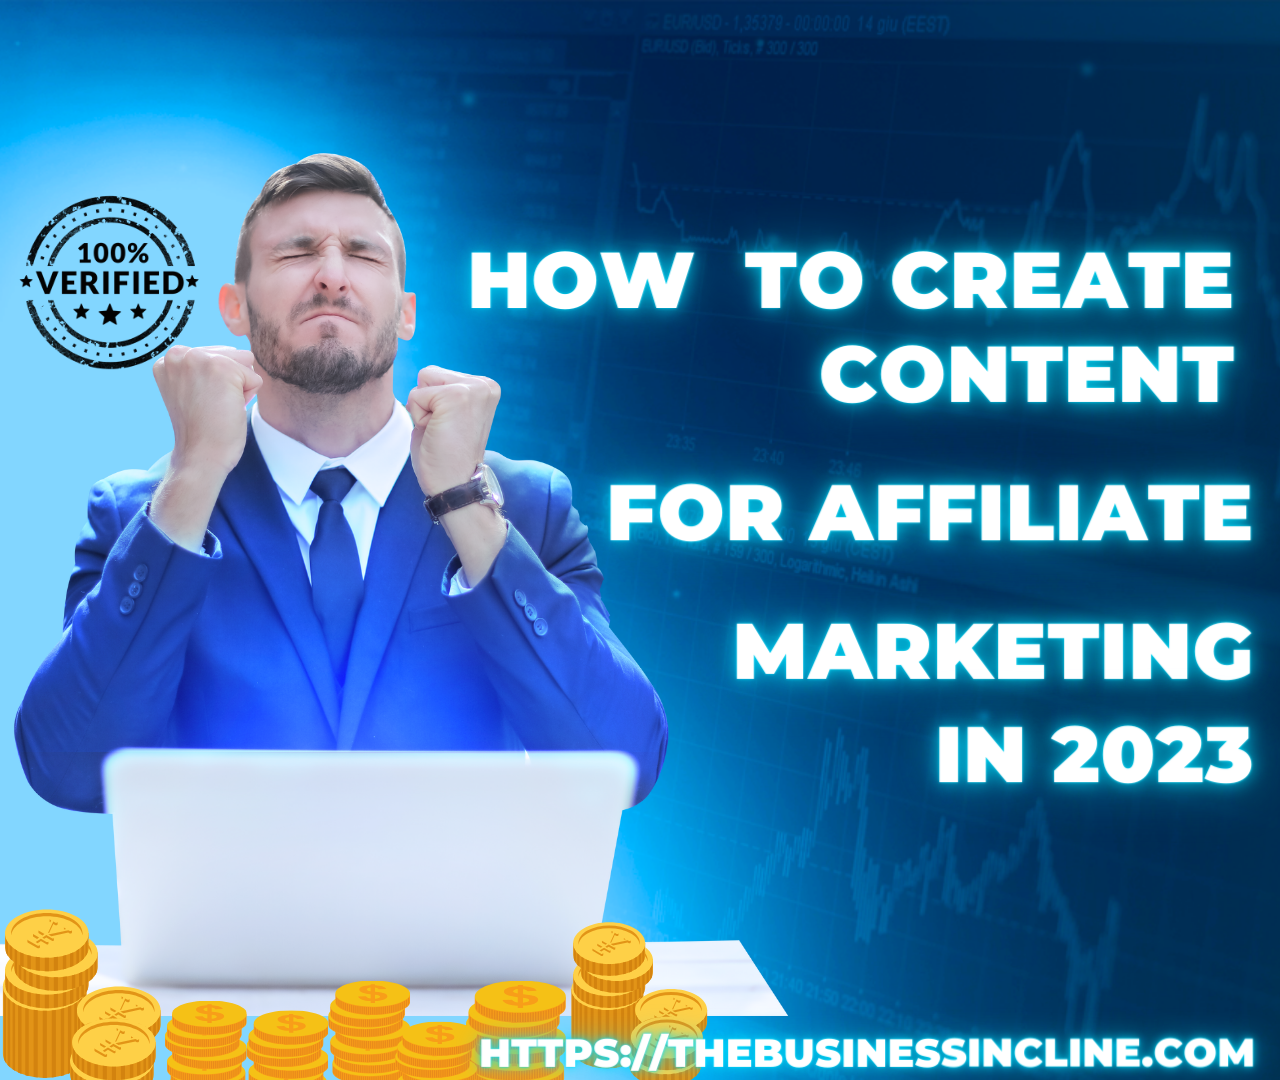 How to Create Content for Affiliate Marketing in 2023